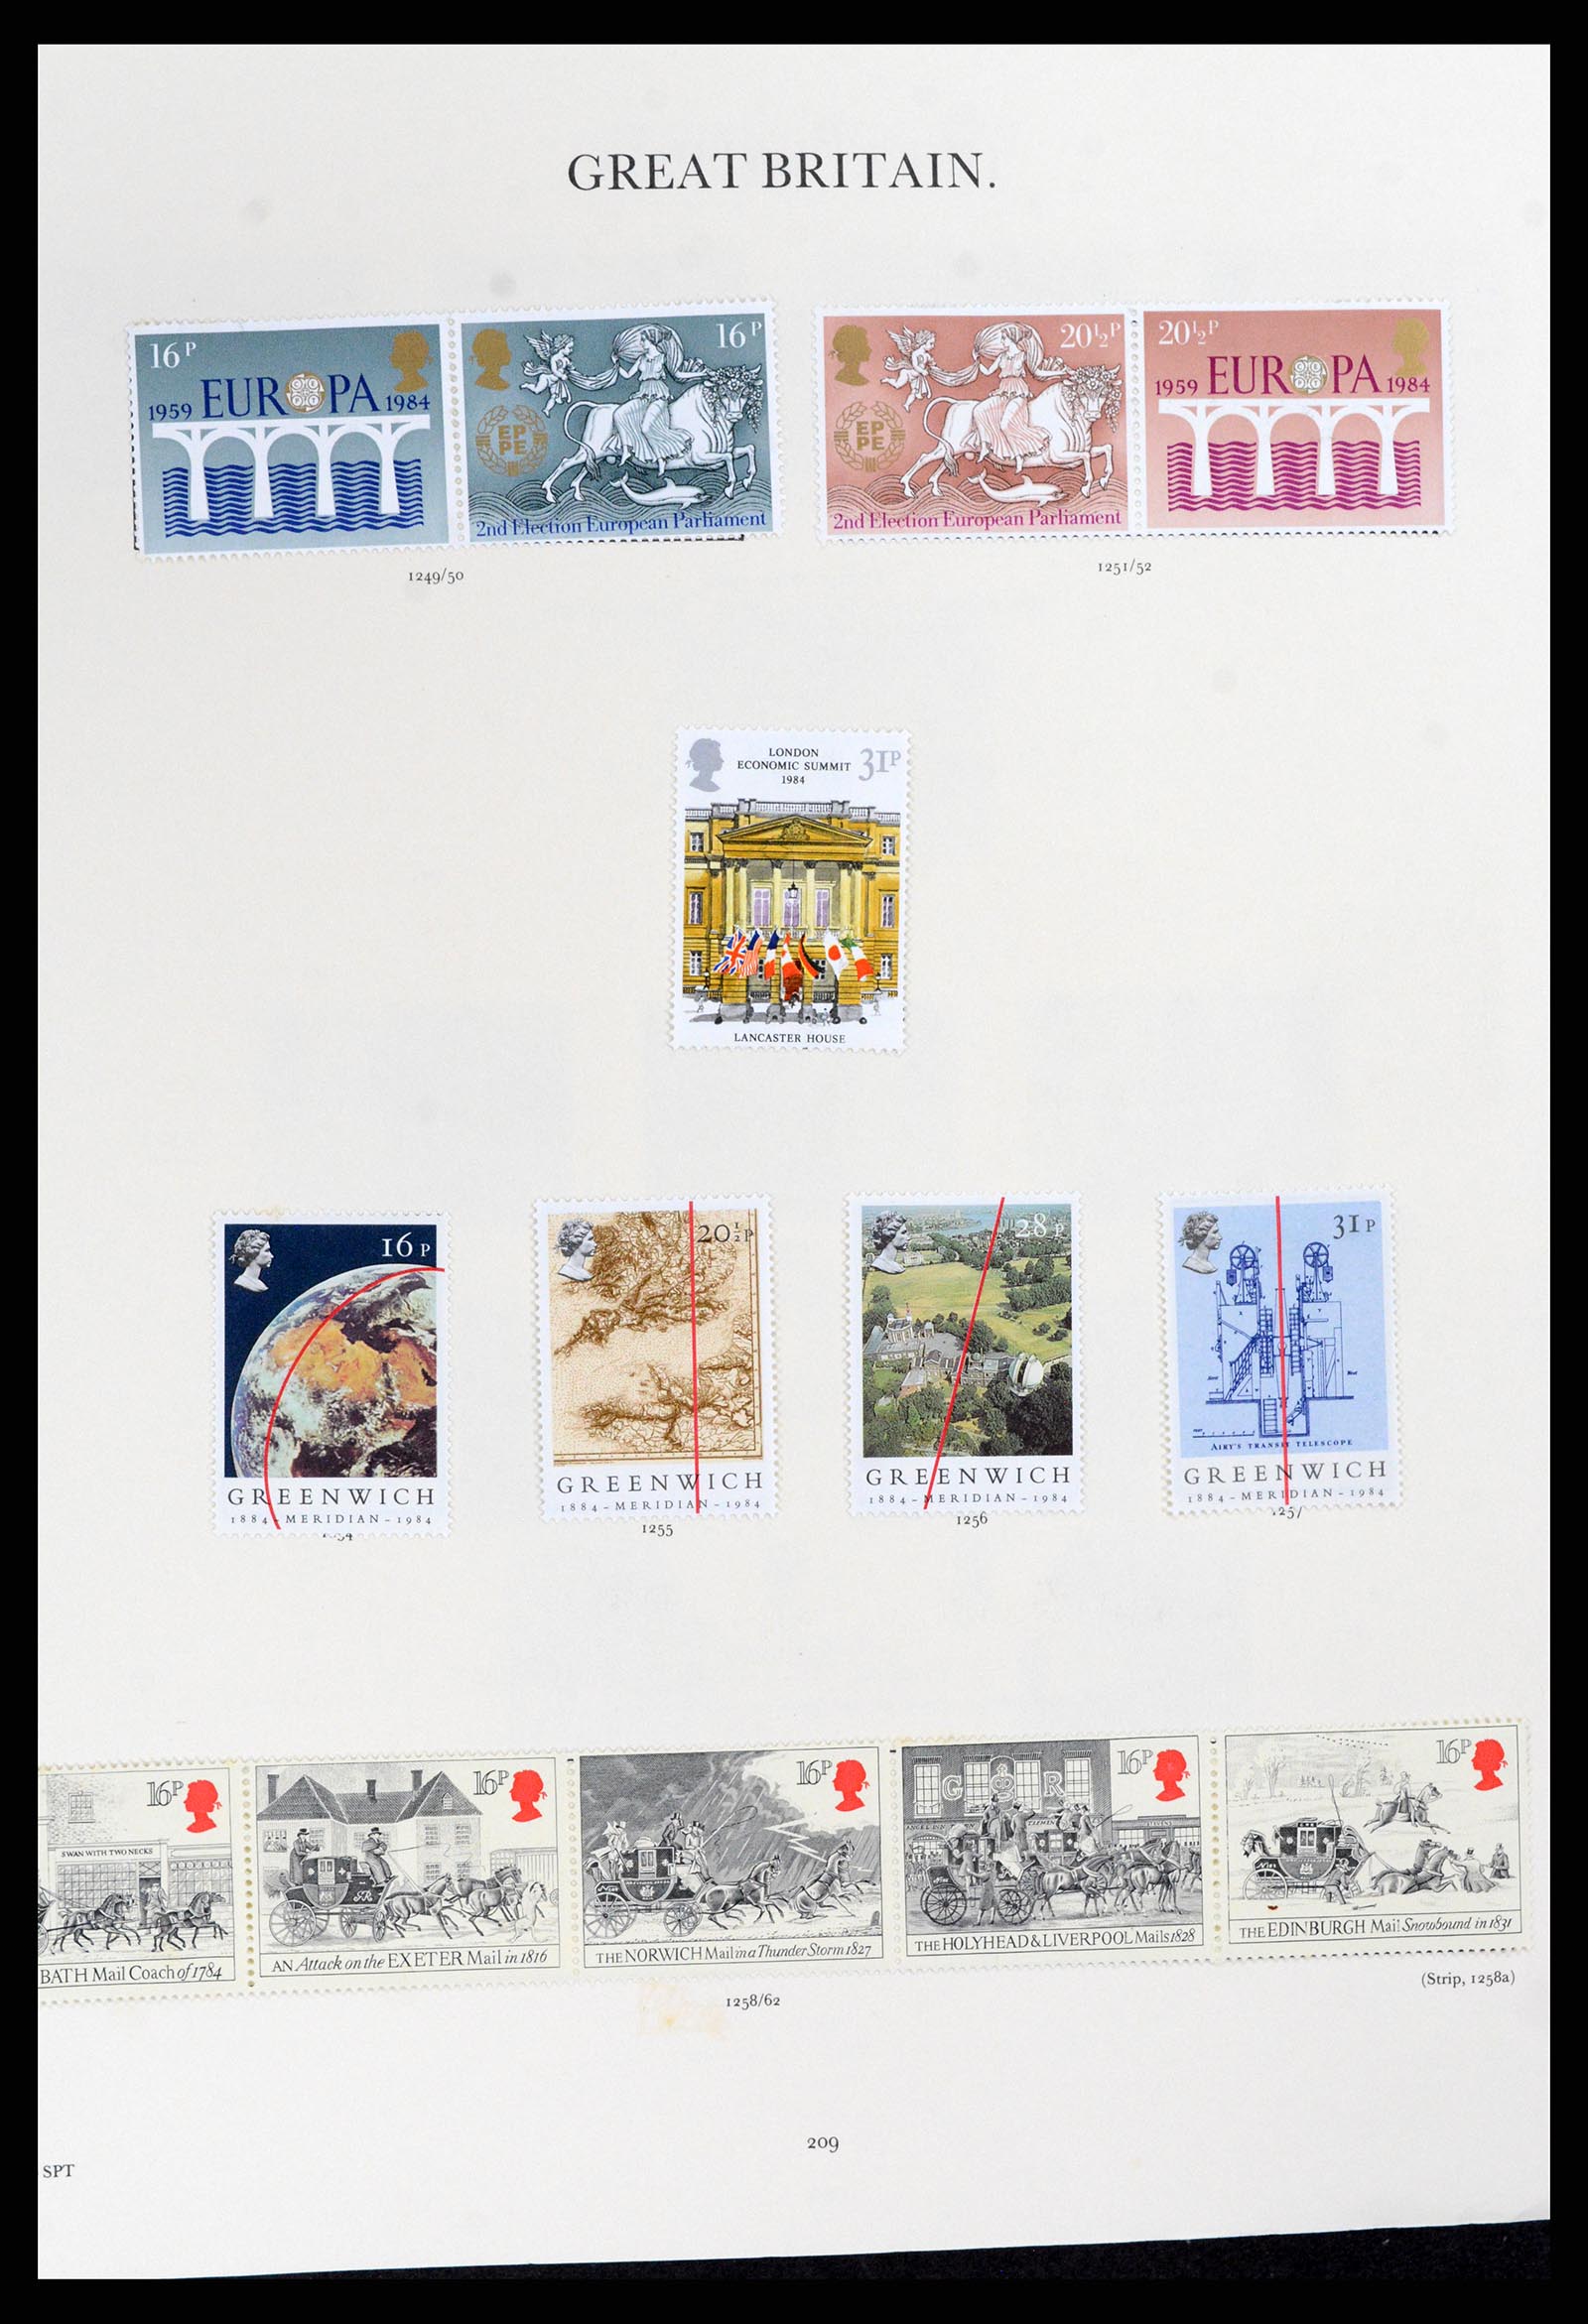 37759 096 - Stamp collection 37759 Great Britain and Colonies in Europe 1858-2005.